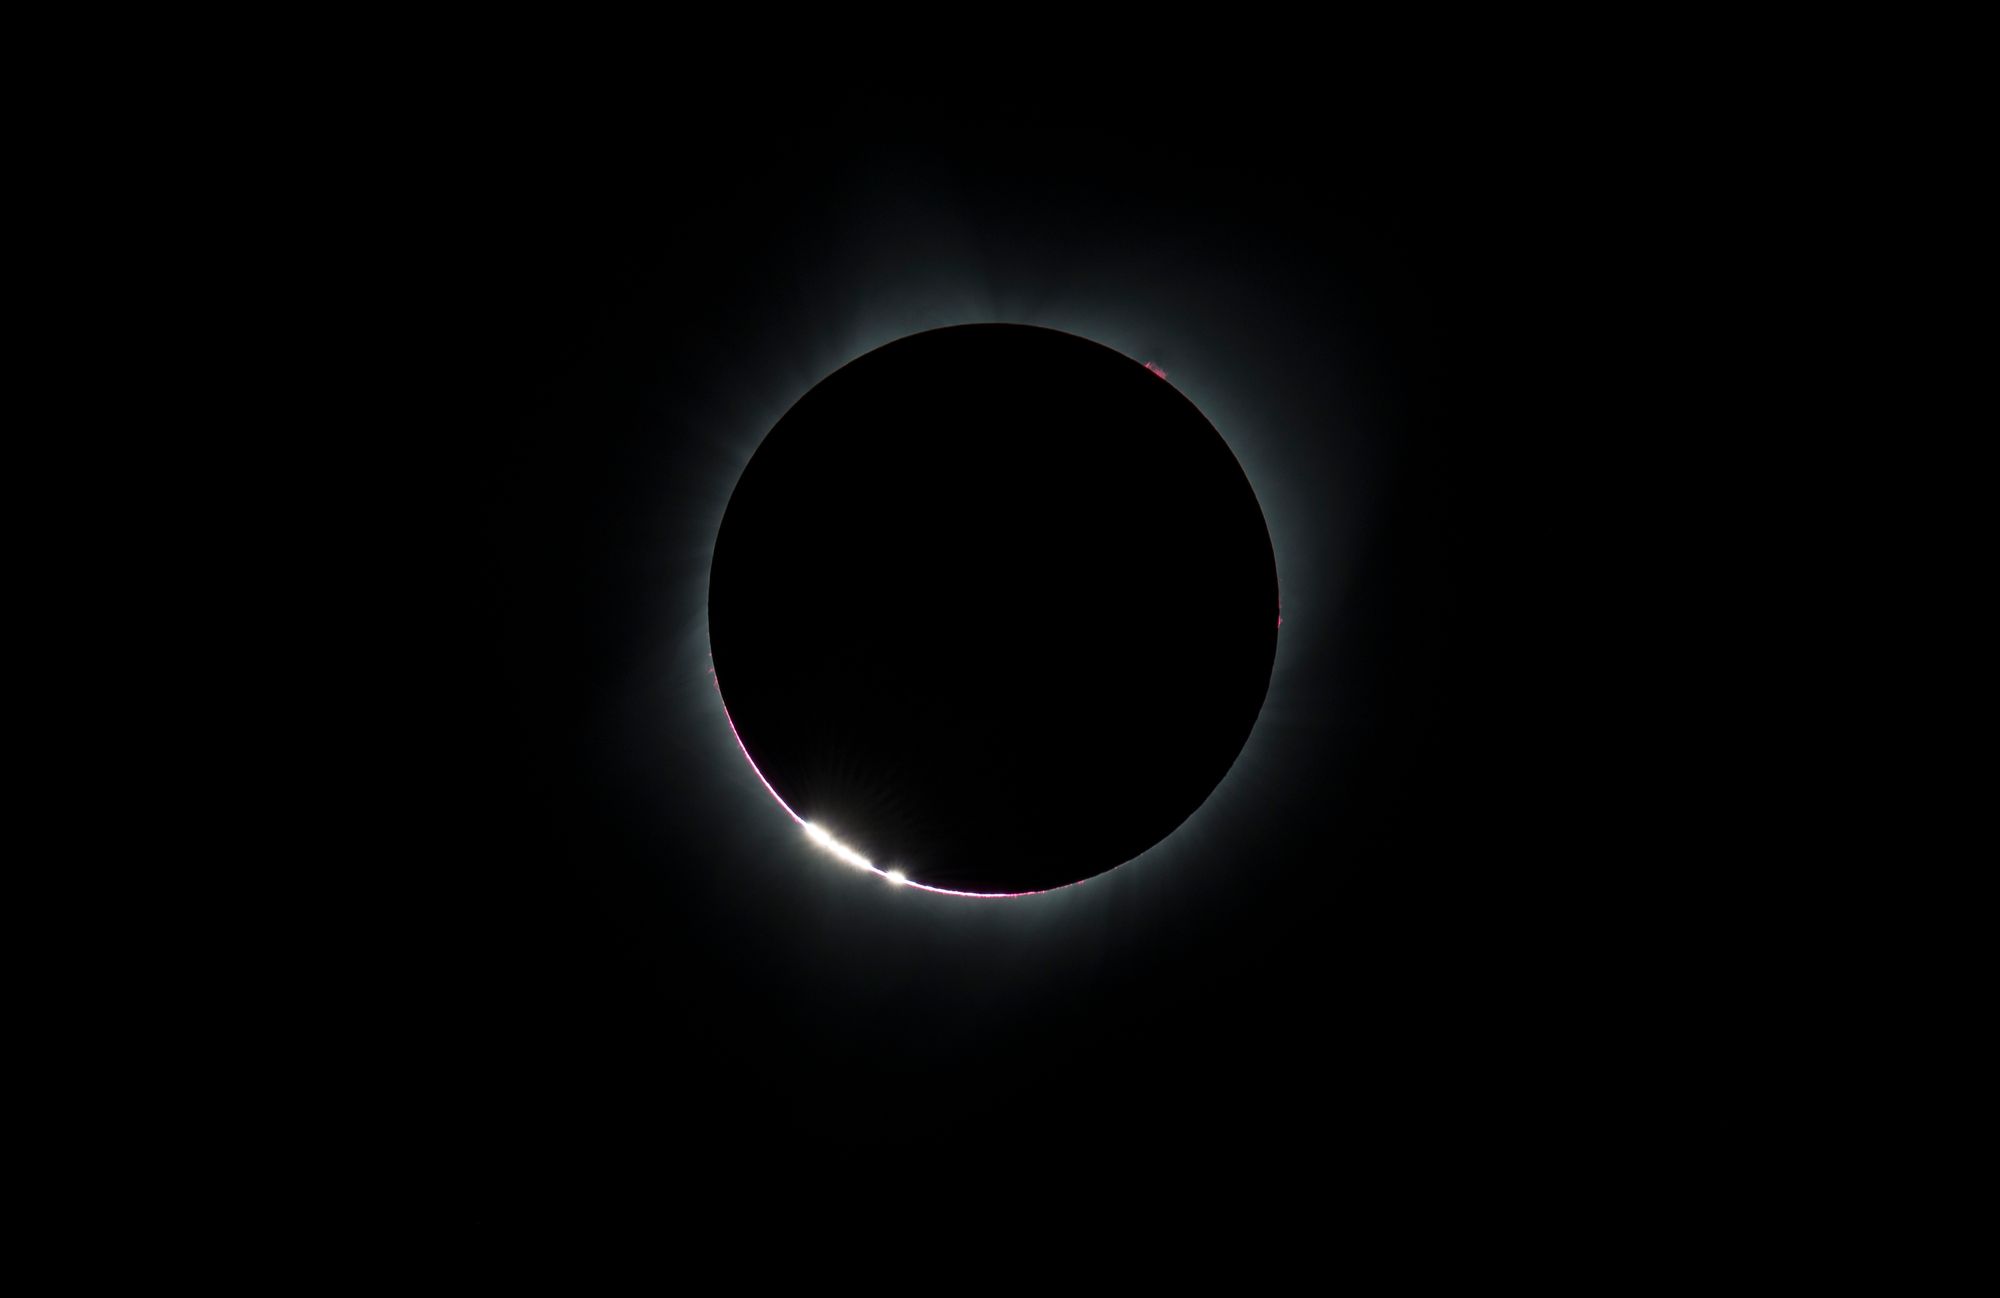 An eclipsed sun with Baily's Beads visible around the edges